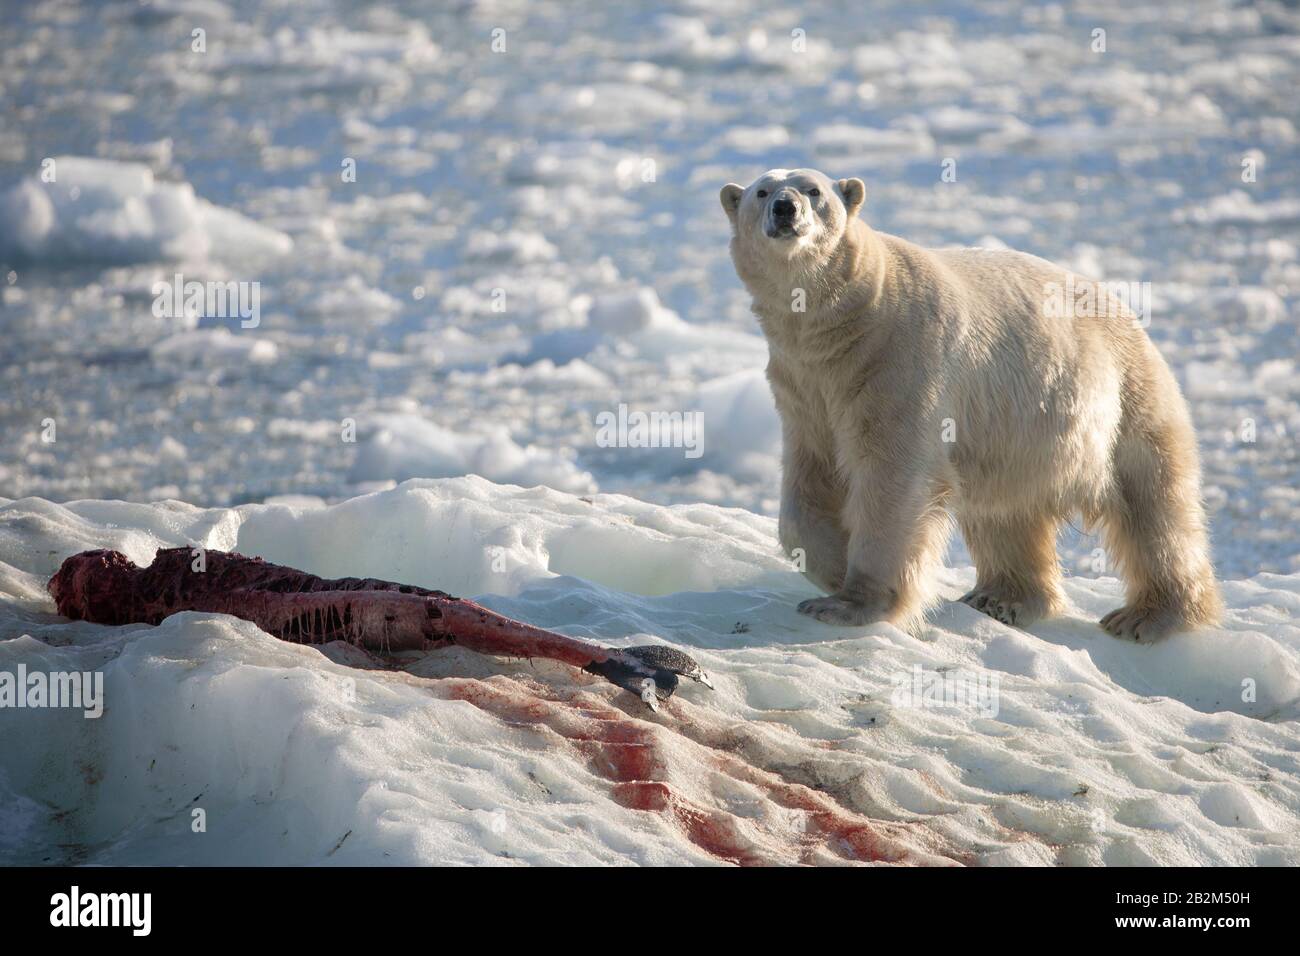 Big Polar bear on the floating ice in the arctic. Svalbard, Norway Stock Photo